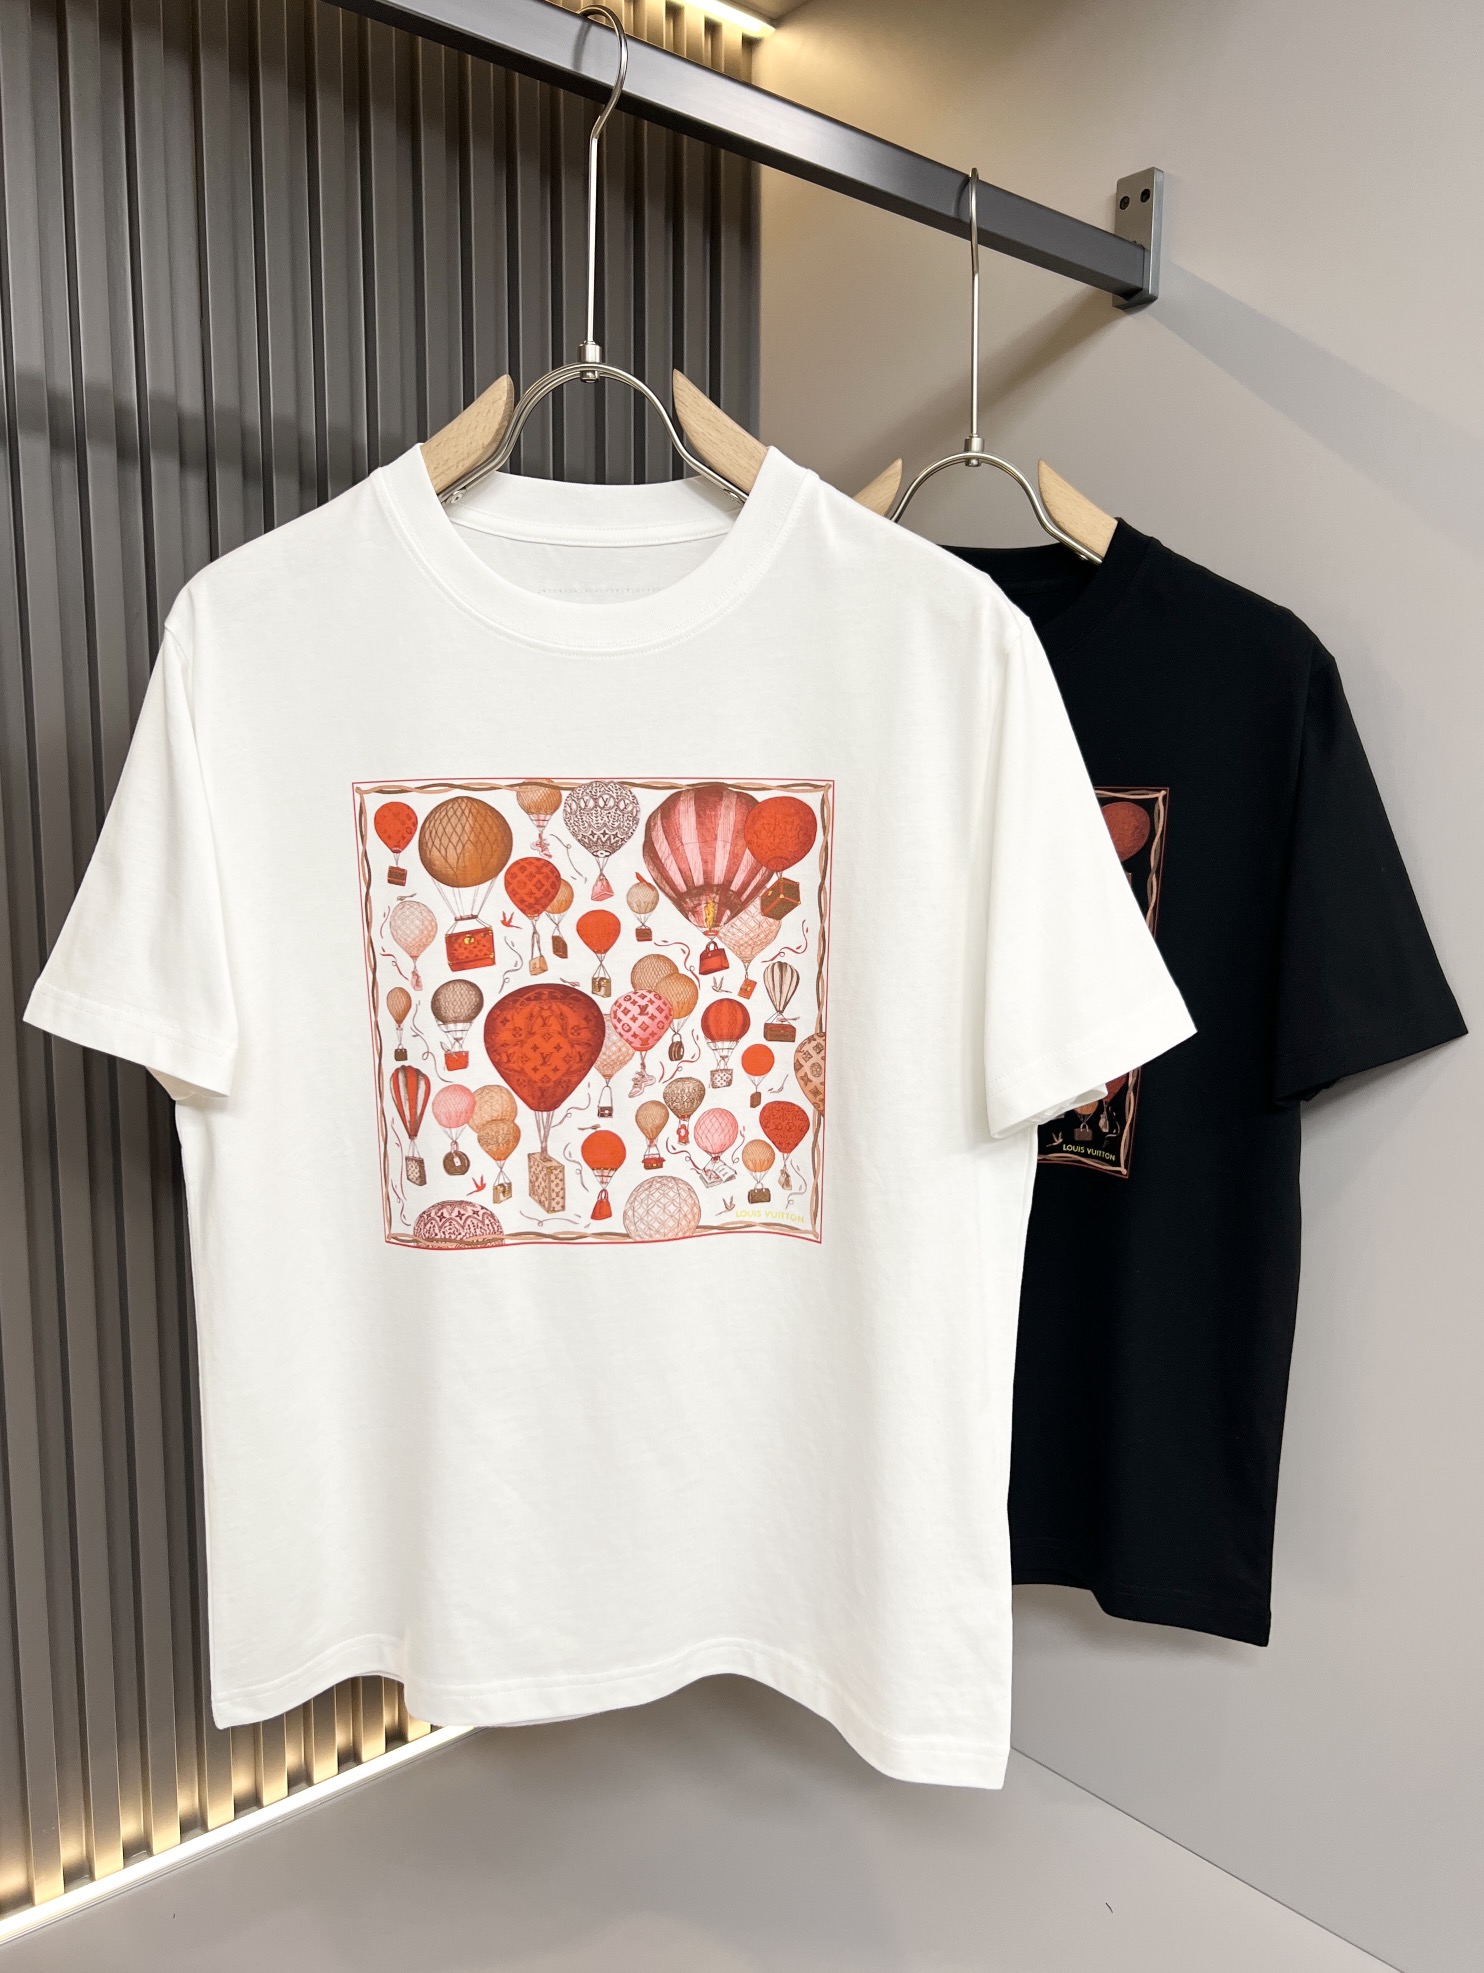 Louis Vuitton Clothing T-Shirt Printing Unisex Cotton Spring/Summer Collection Short Sleeve